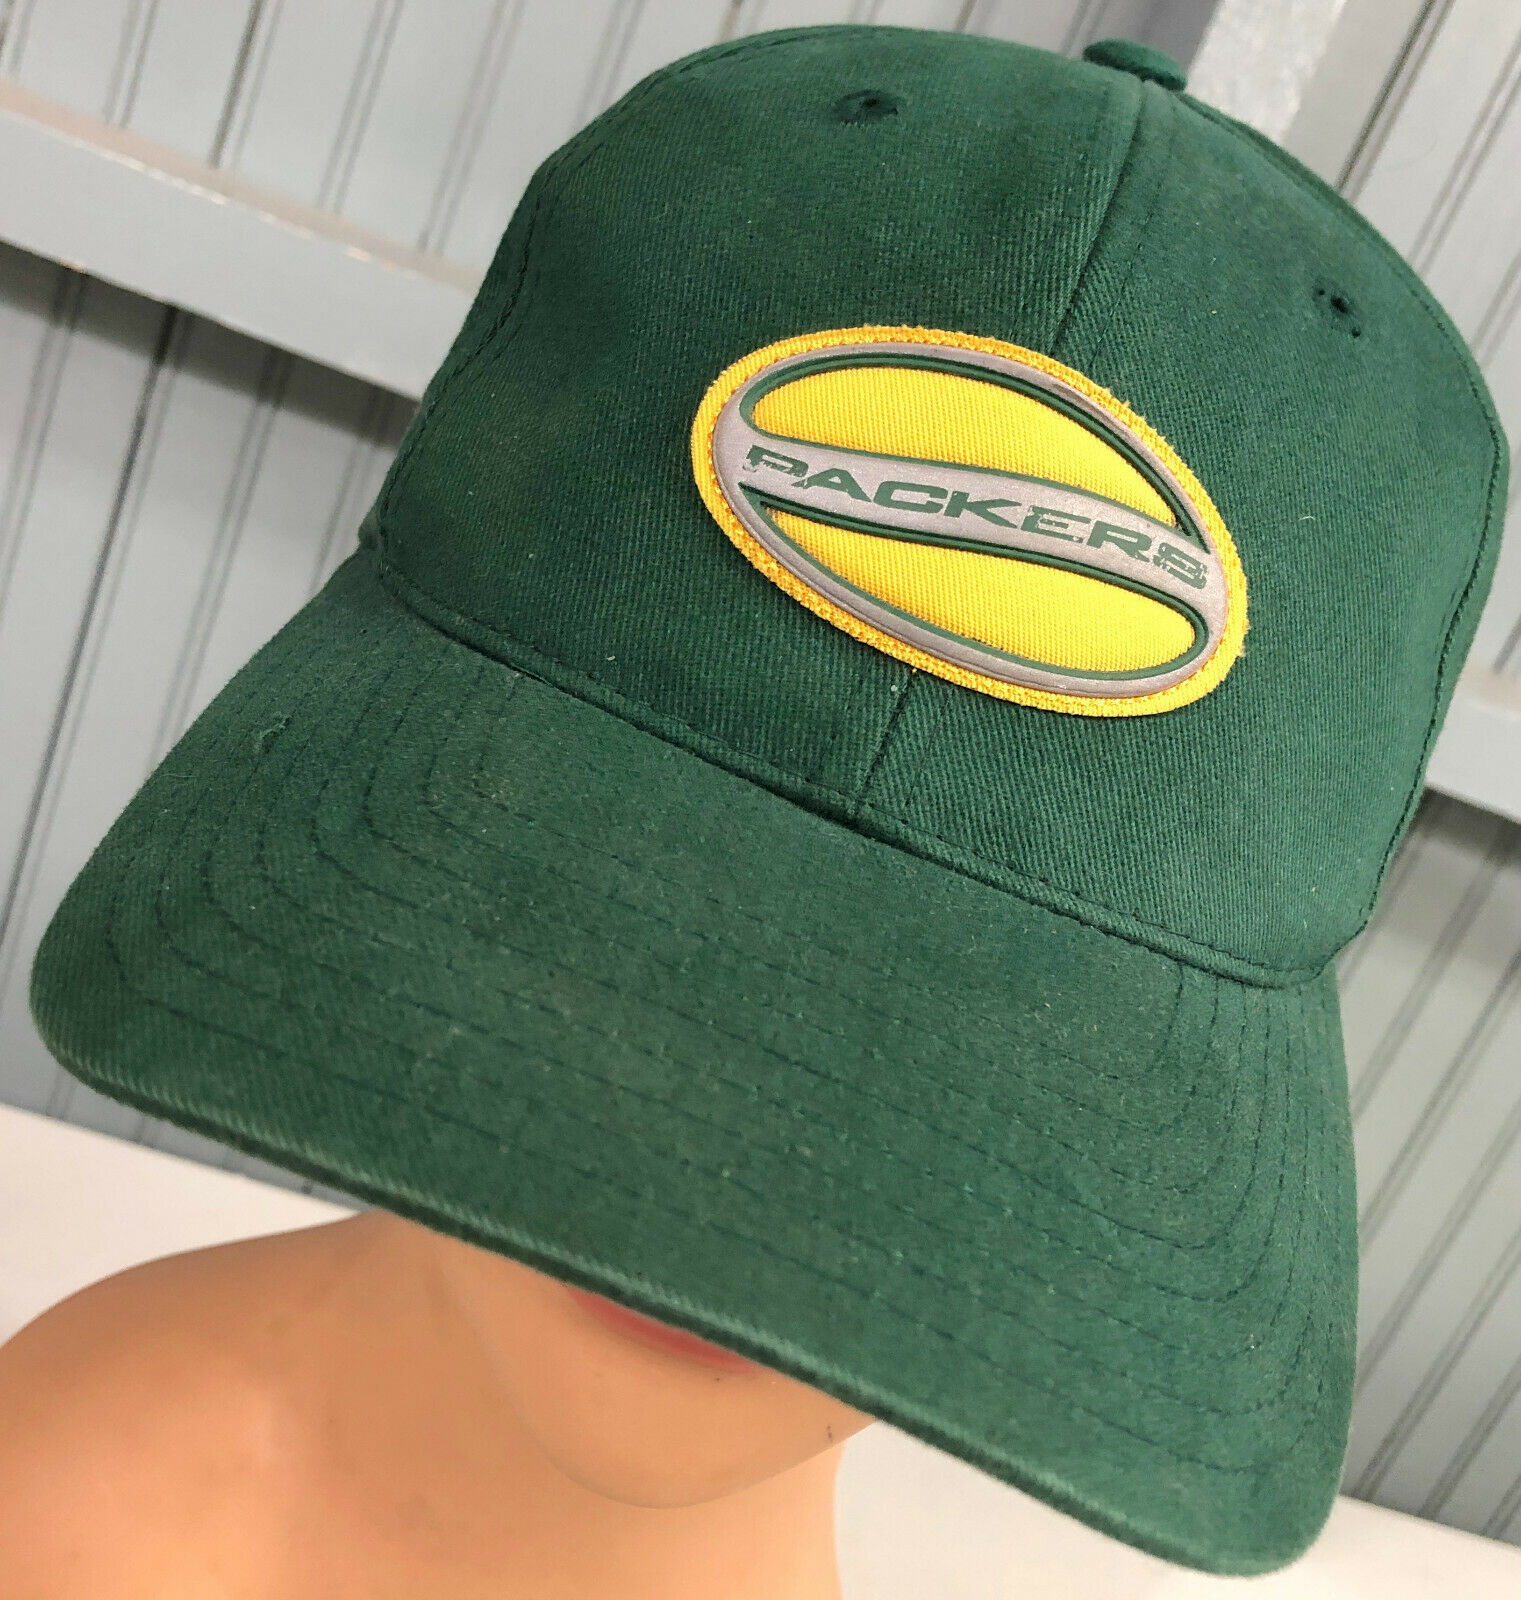 Primary image for Green Bay Packers American Needle Adjustable Baseball Hat Cap